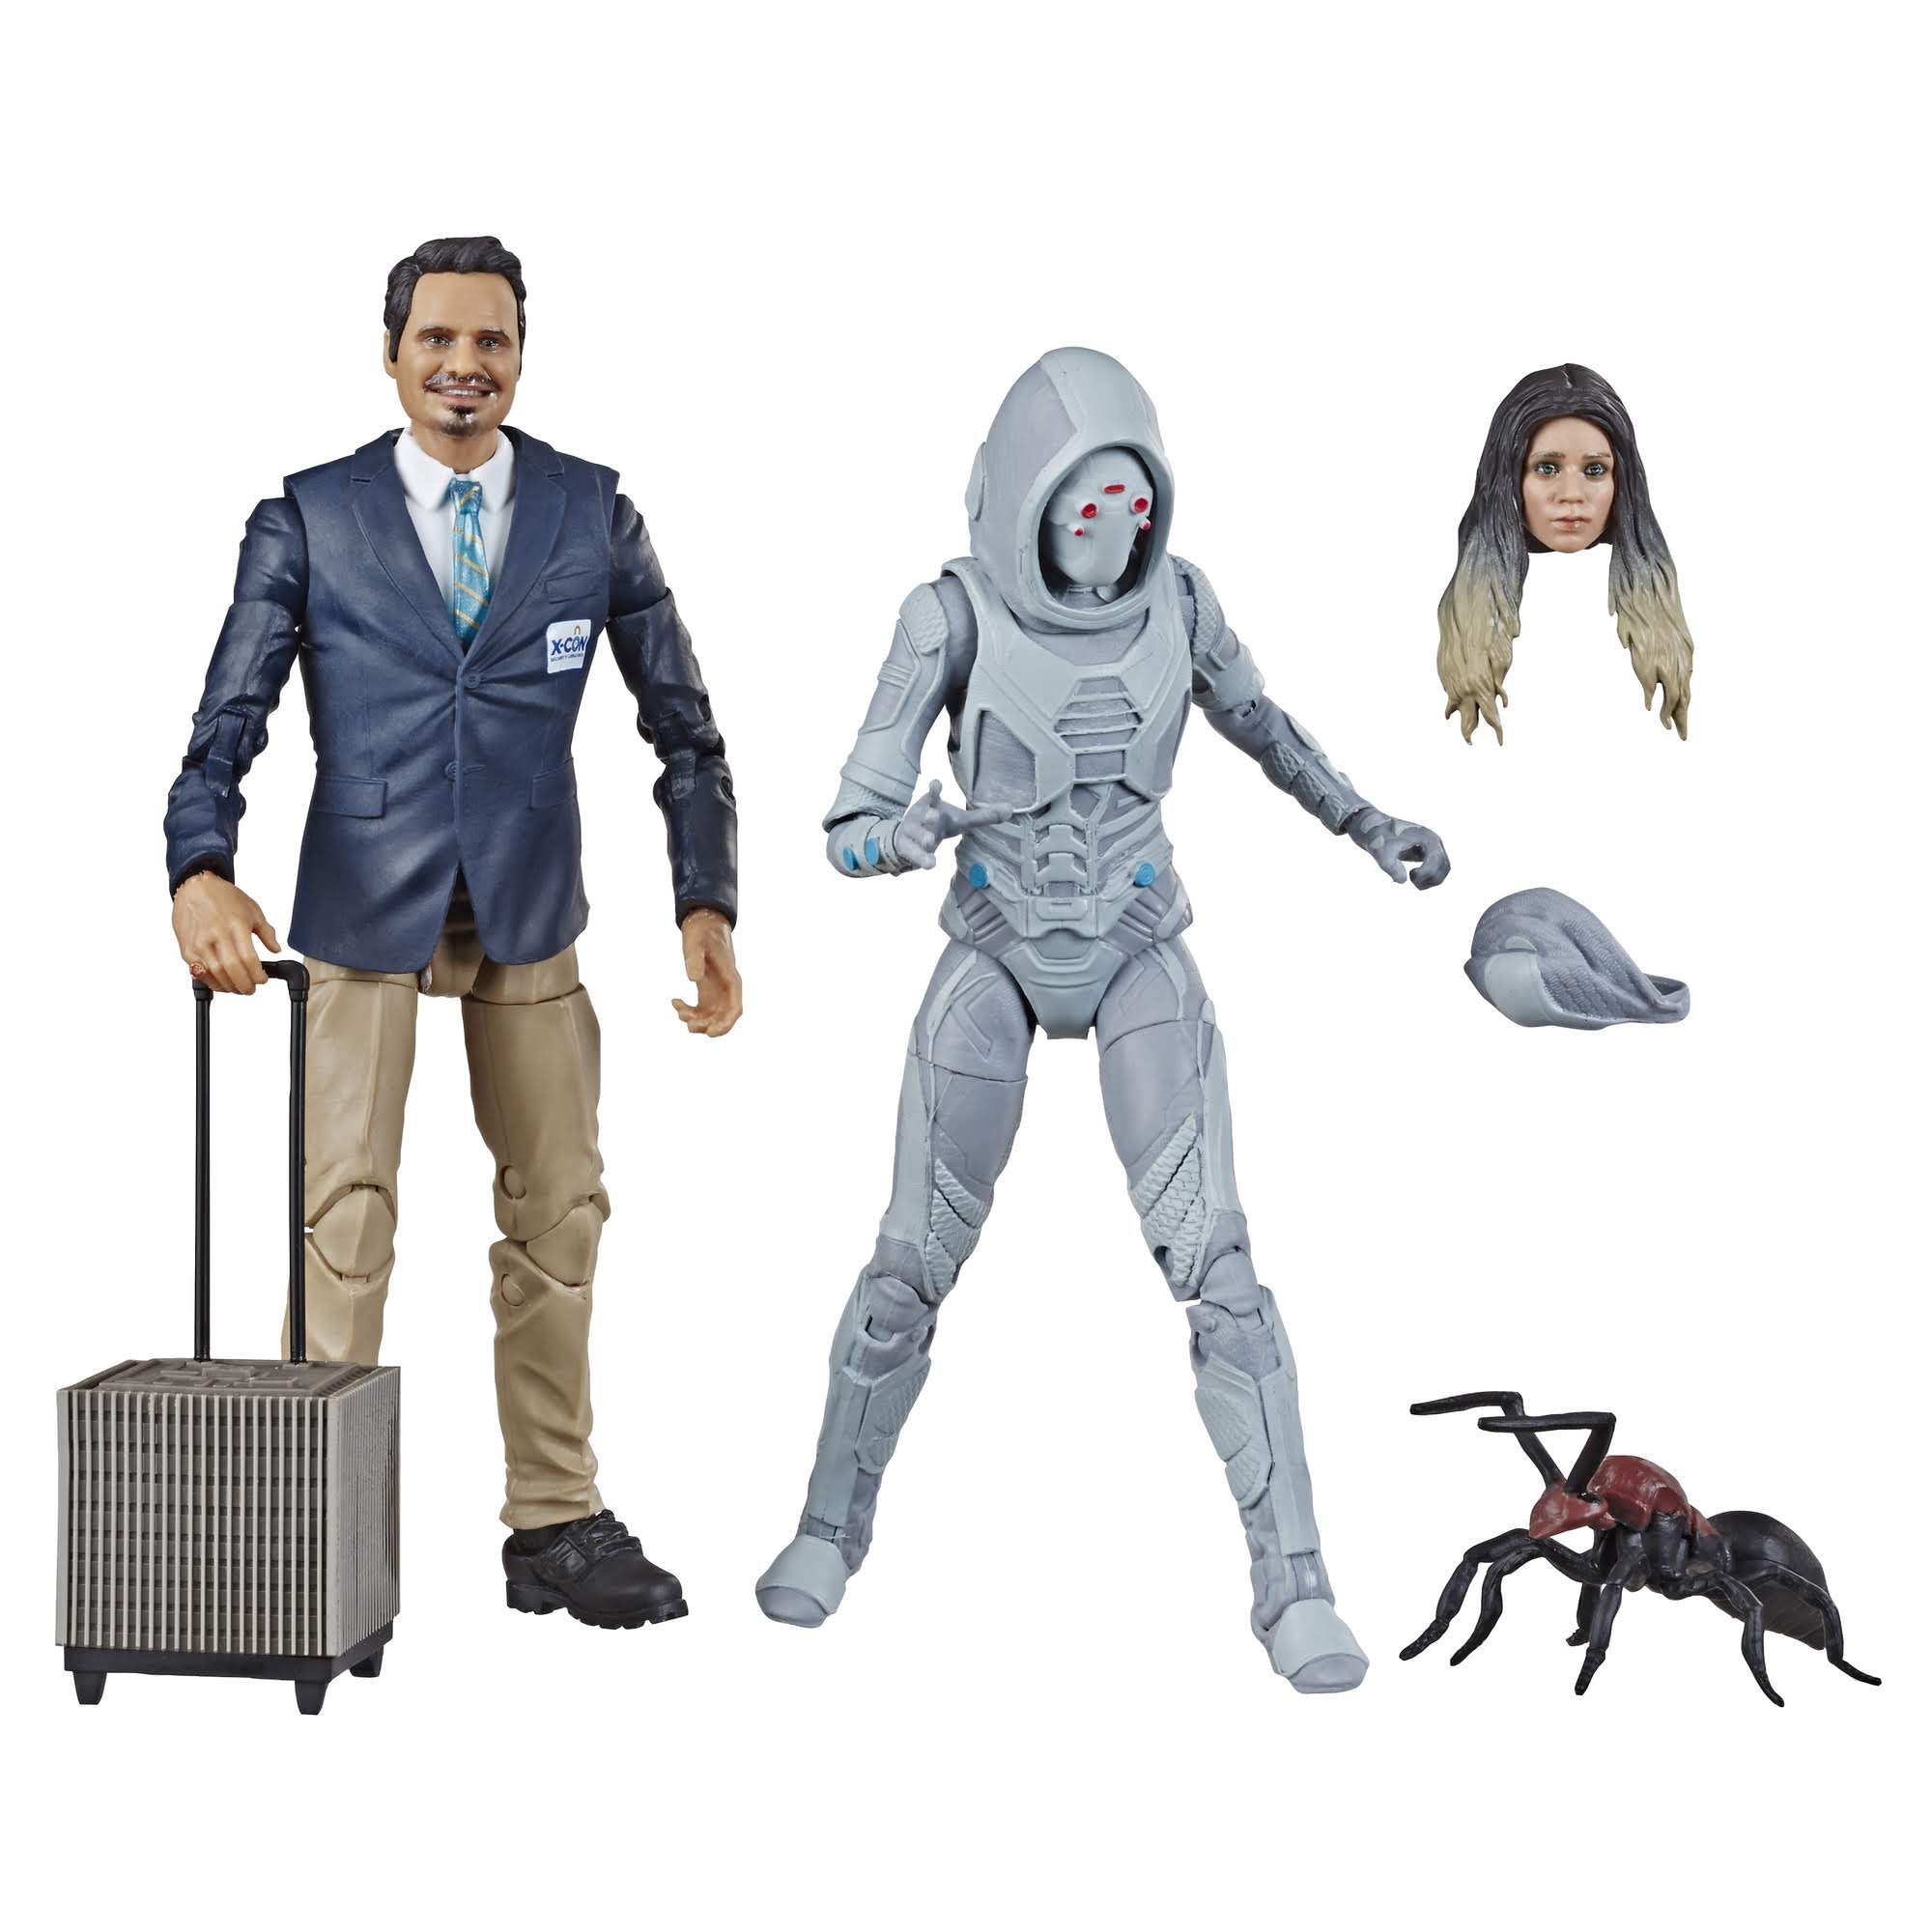 Hasbro-Marvel-Legends-80th-Anniversary-Luis-and-Ghost-2-pack-Promo-02.jpg